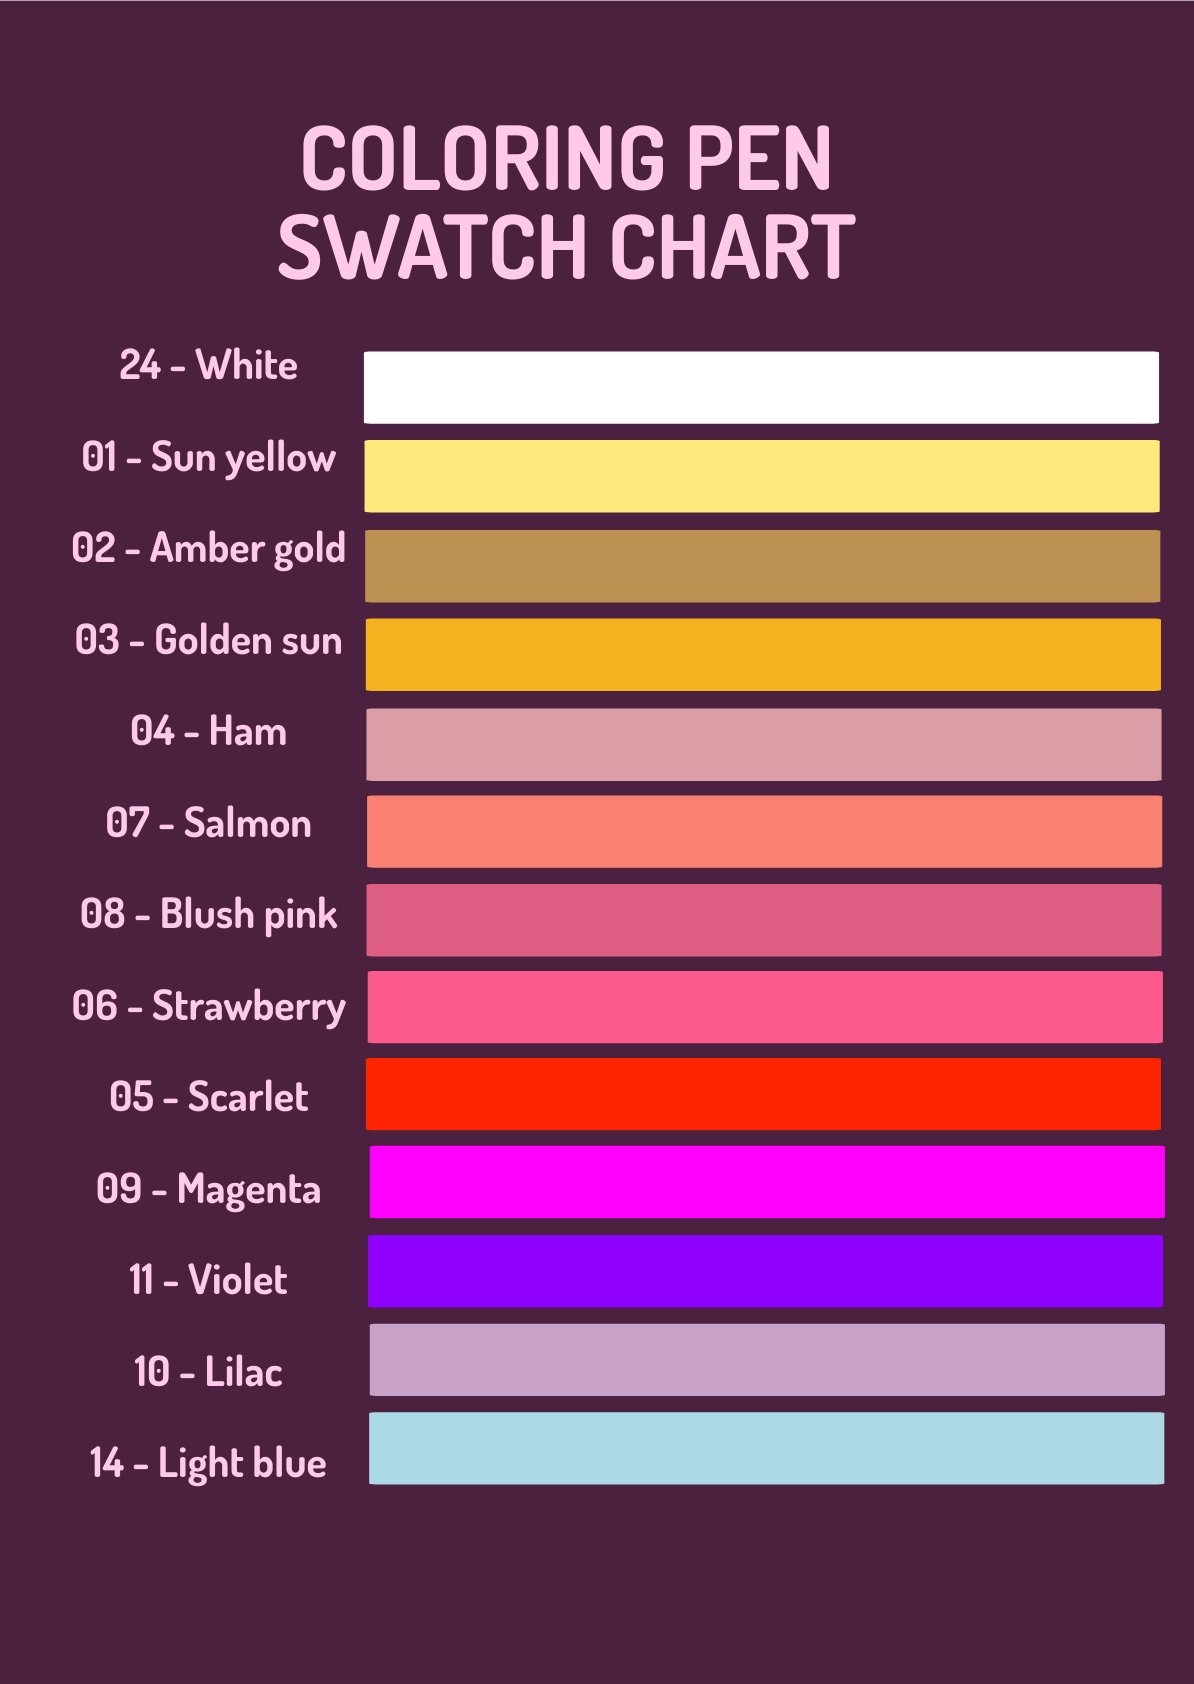 Coloring Pen Swatch Chart in Illustrator, Publisher